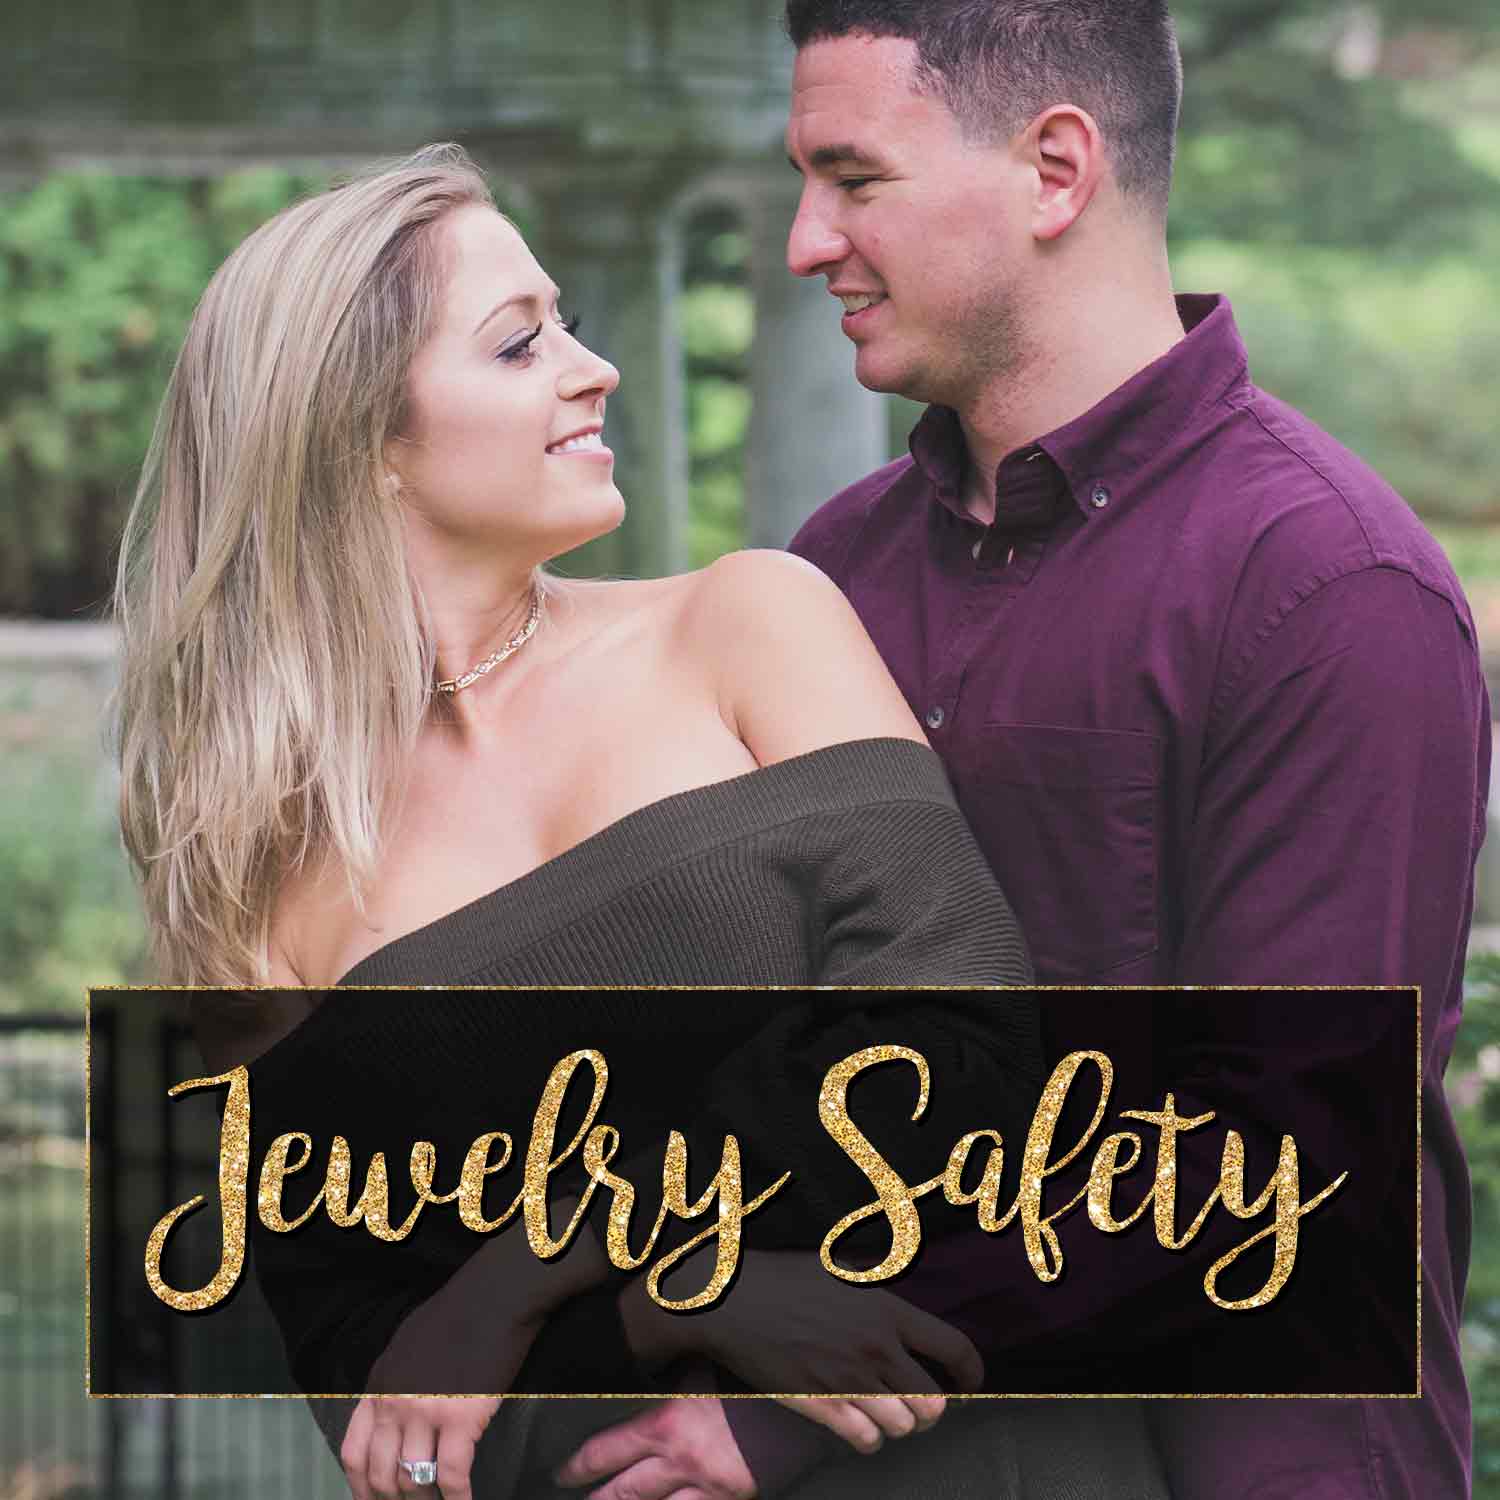 A dark haired man hugging a blonde woman from behind and smiling over the text "Jewelry Safety."